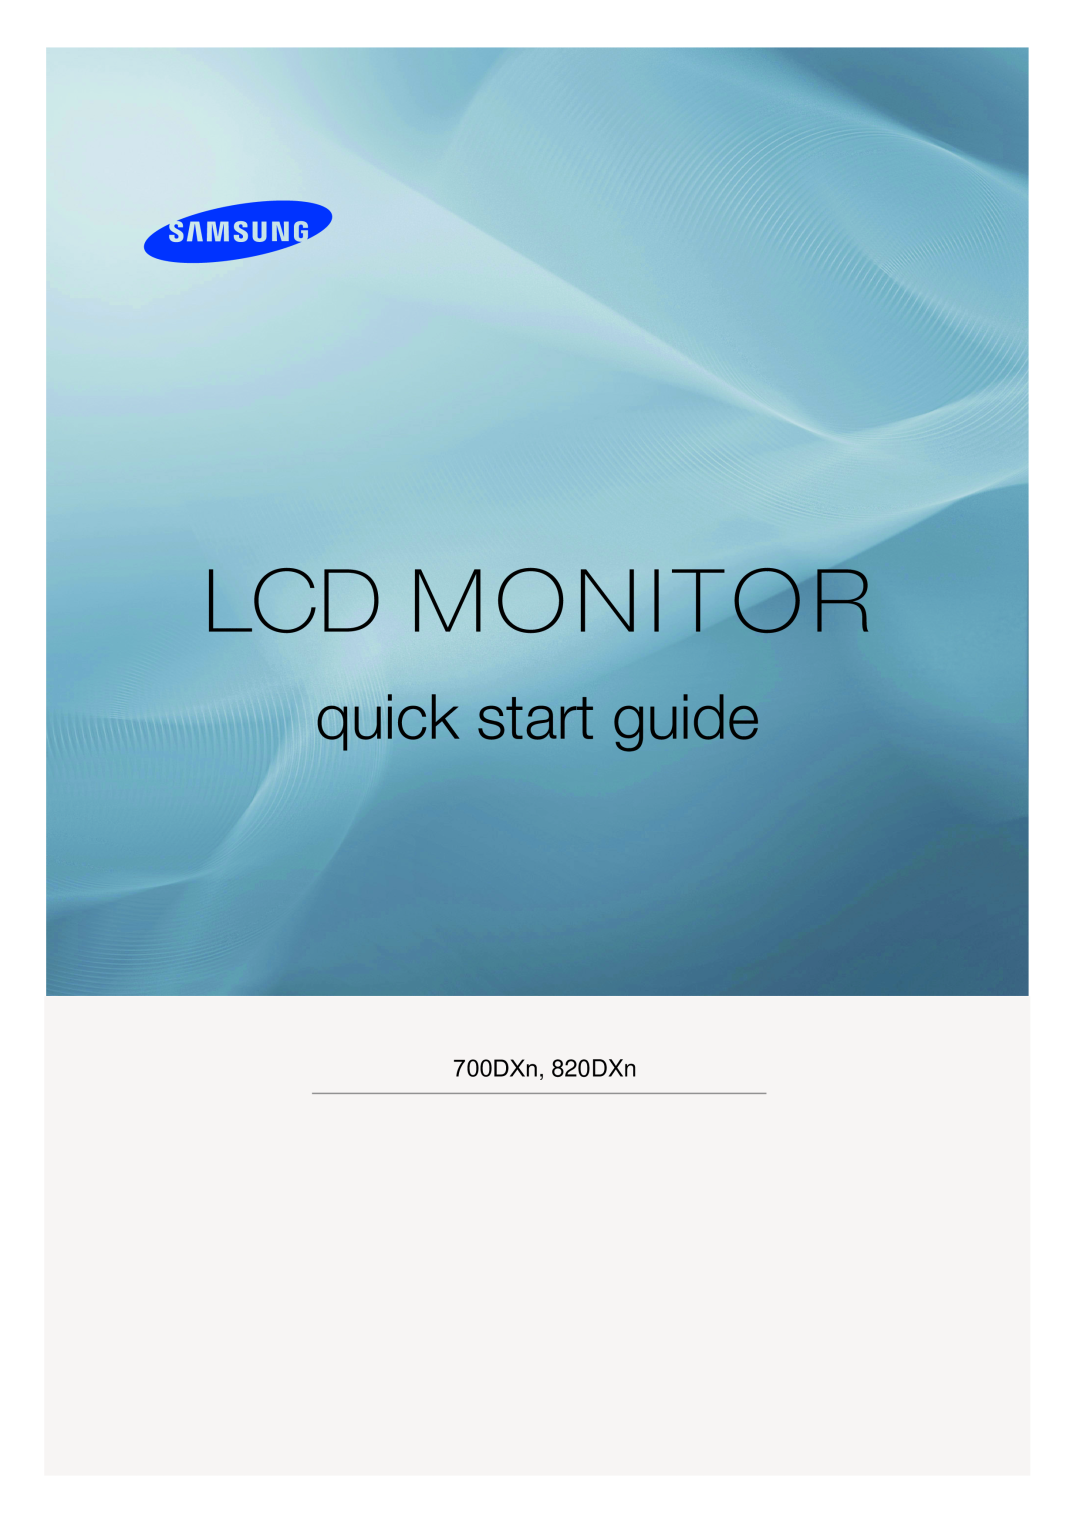 Samsung LS82BPTNS/EDC, LS70BPTNS/EDC, LS70BPTNB/EDC manual Lcd Monitor, quick start guide, 700DXn, 820DXn 